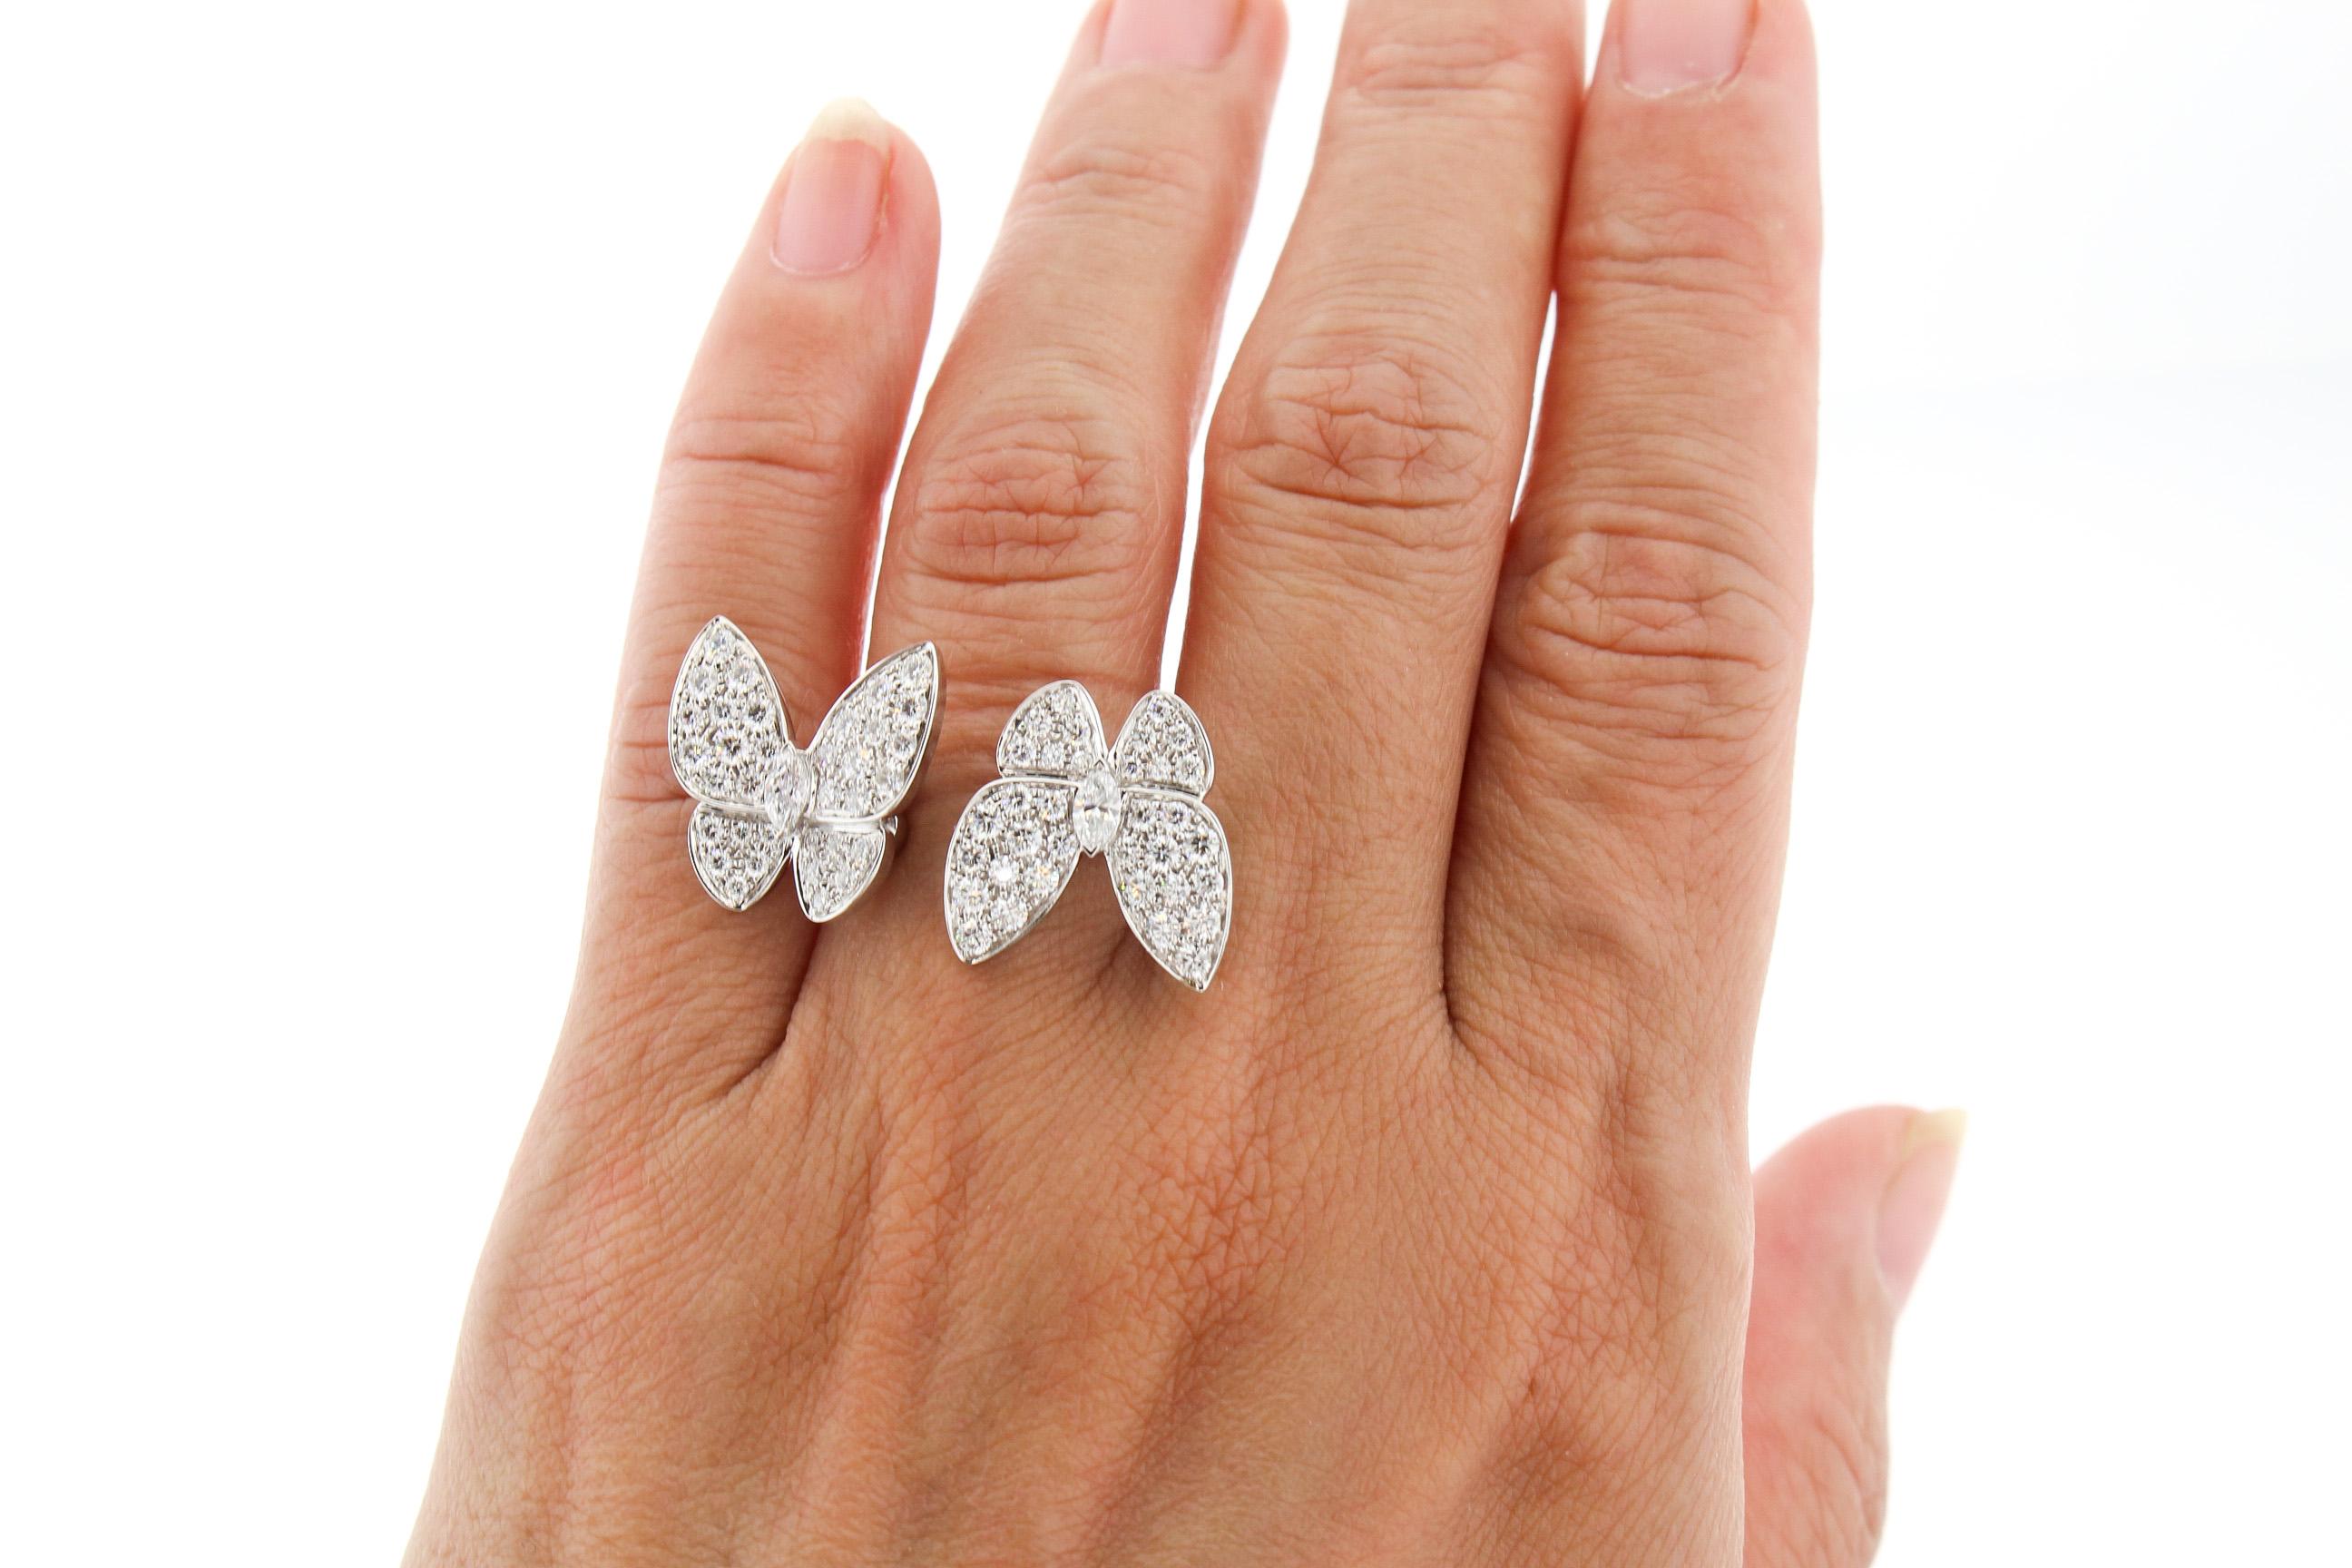 Modern Van Cleef & Arpels Two Butterfly Between the Finger Ring